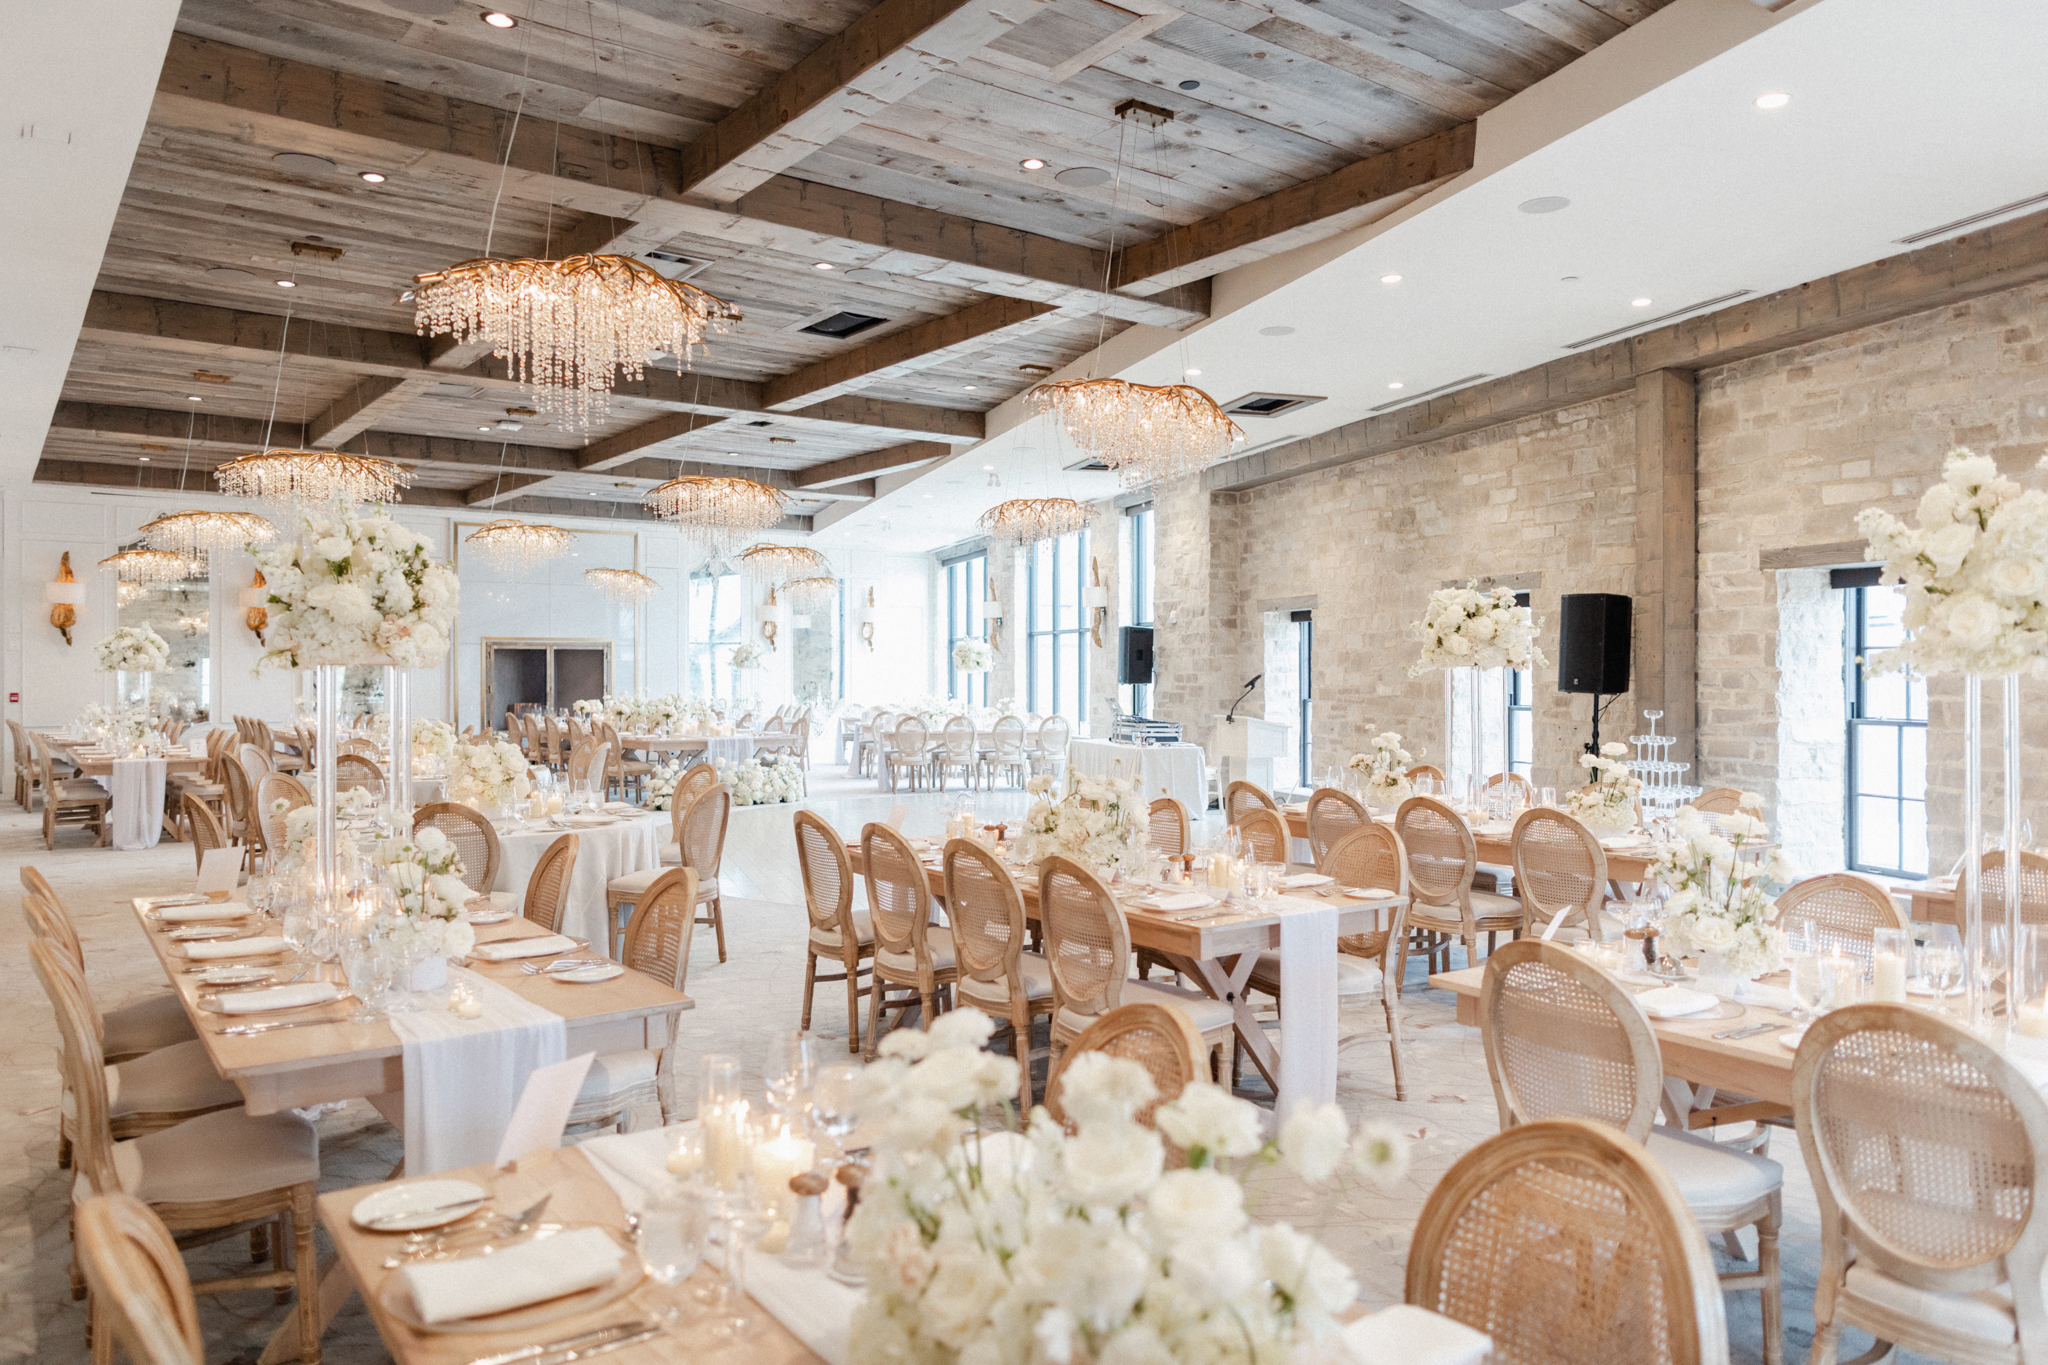 A rustic wedding reception at Elora Mill, adorned with elegant white flowers, creating a charming ambiance.